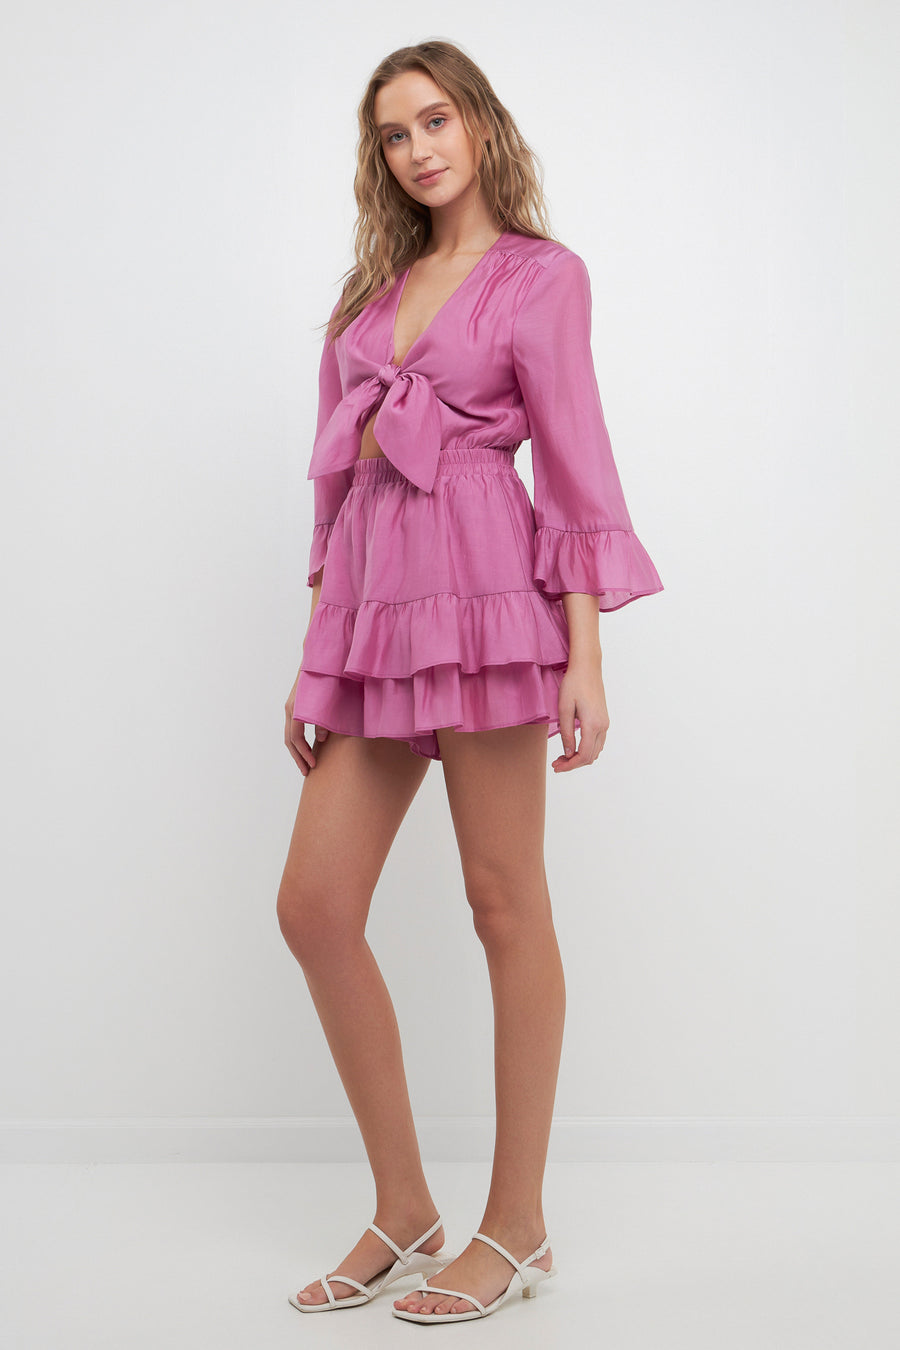 Ruffle and Front Tie Detail Romper